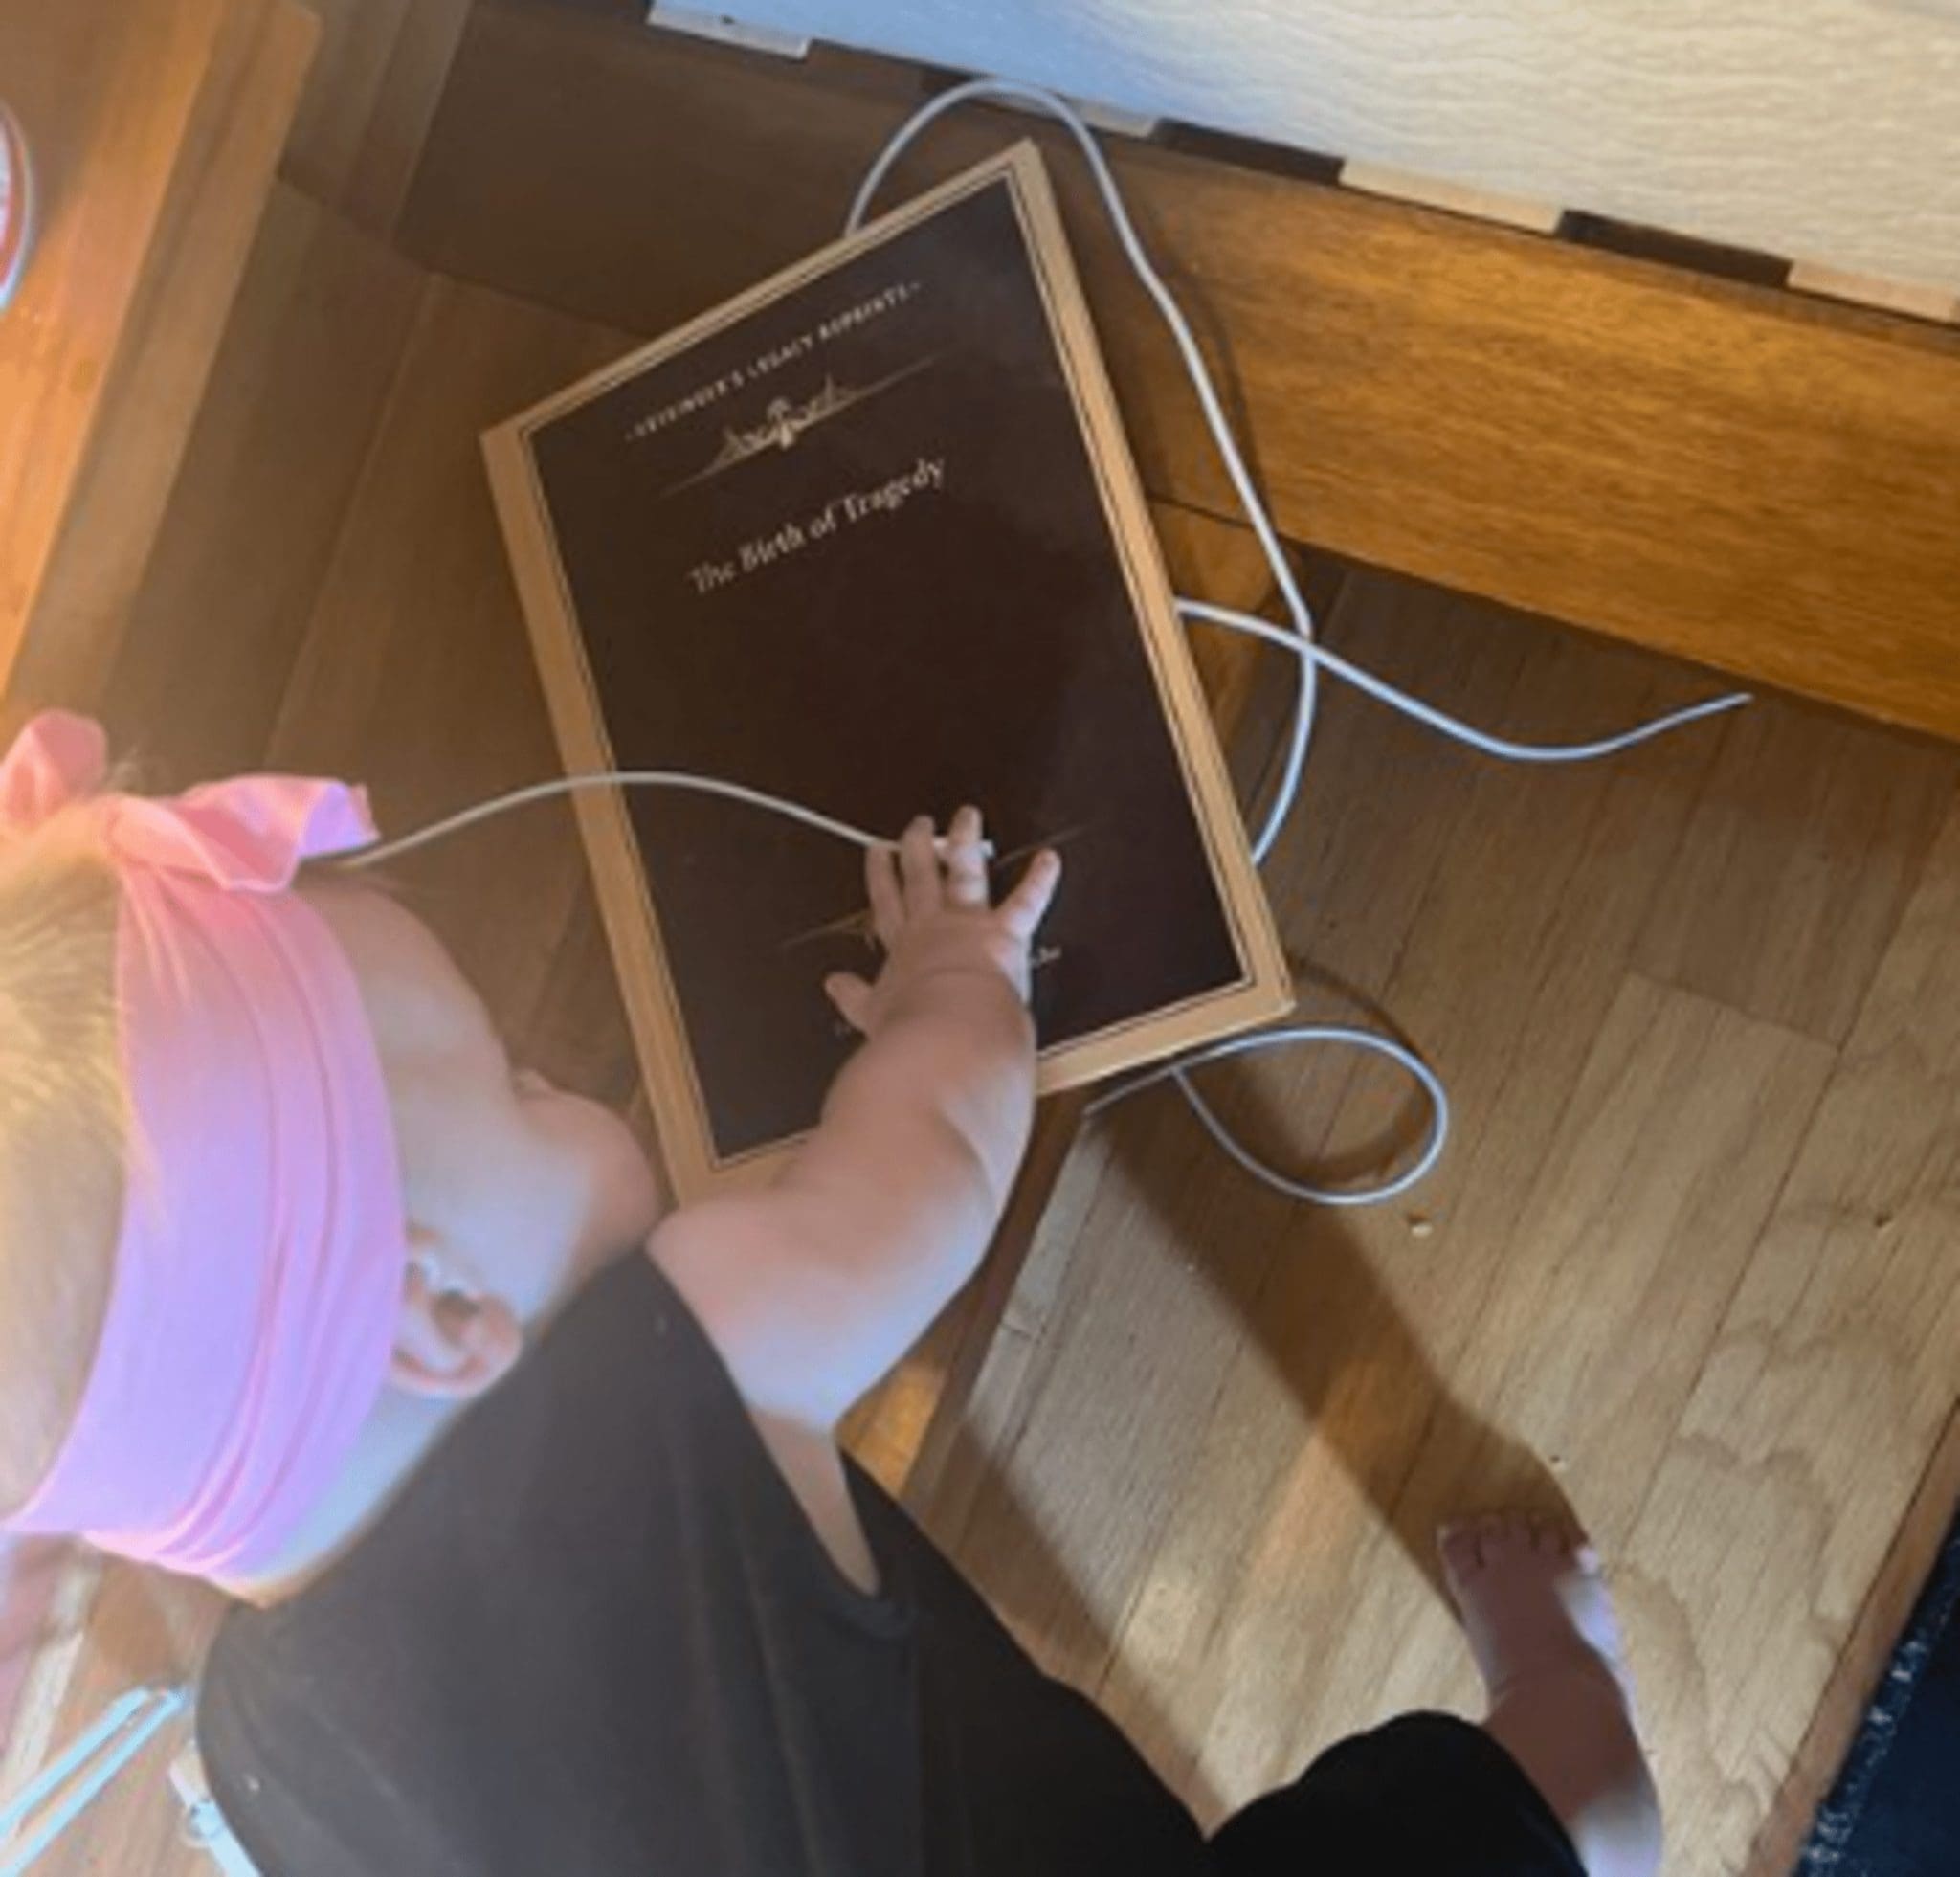 The singer recently posted a rare snapshot on Twitter of her daughter Exa Dark Siderael, who goes by the nickname Y, enjoying some music while playing with a copy of The Birth of Tragedy by German philosopher Friedrich Nietzsche. My daughter is getting down to some house music while reading this book Nietzsche's "The Birth of Tragedy." What a queen, she tweeted along with a picture of her 9-month-old daughter sitting on a bench in a black romper with a pink bow band in her blonde hair. The mother of two, who also has a 2-year-old son named X A-12 with the inventor of Tesla, wrote in a follow-up tweet that "she adores Boris Brejcha omg she is so hardcore haha." In addition to Y and X, Musk shares twins with Shivon Zilis, an executive at Neuralink, whom he welcomed in November of last year. In addition, he has twins named Vivian Jenna Wilson and Griffin Musk, who are now 18 years old, as well as triplets named Kai, Damian, and Sax Musk, who were all born in 2006, with his first wife, Justine Wilson. Griffin and Vivian Jenna are the eldest of three sets of twins. Another son, Nevada Musk, was born to the couple, but he passed away when he was just 10 weeks old. Musk posted a flashback photo of himself and X from Thanksgiving of the previous year on Twitter around a month ago. Thanksgiving of the previous year, after watching one episode of Vikings too many times, he captioned the photograph, which featured him and the little child in an outdoor location. Fans observed that Musk was rocking a shaved head on the sides, prompting a Tesla fan account to inquire as to whether or not he cut his own hair and X's himself. The tech tycoon did indeed respond.